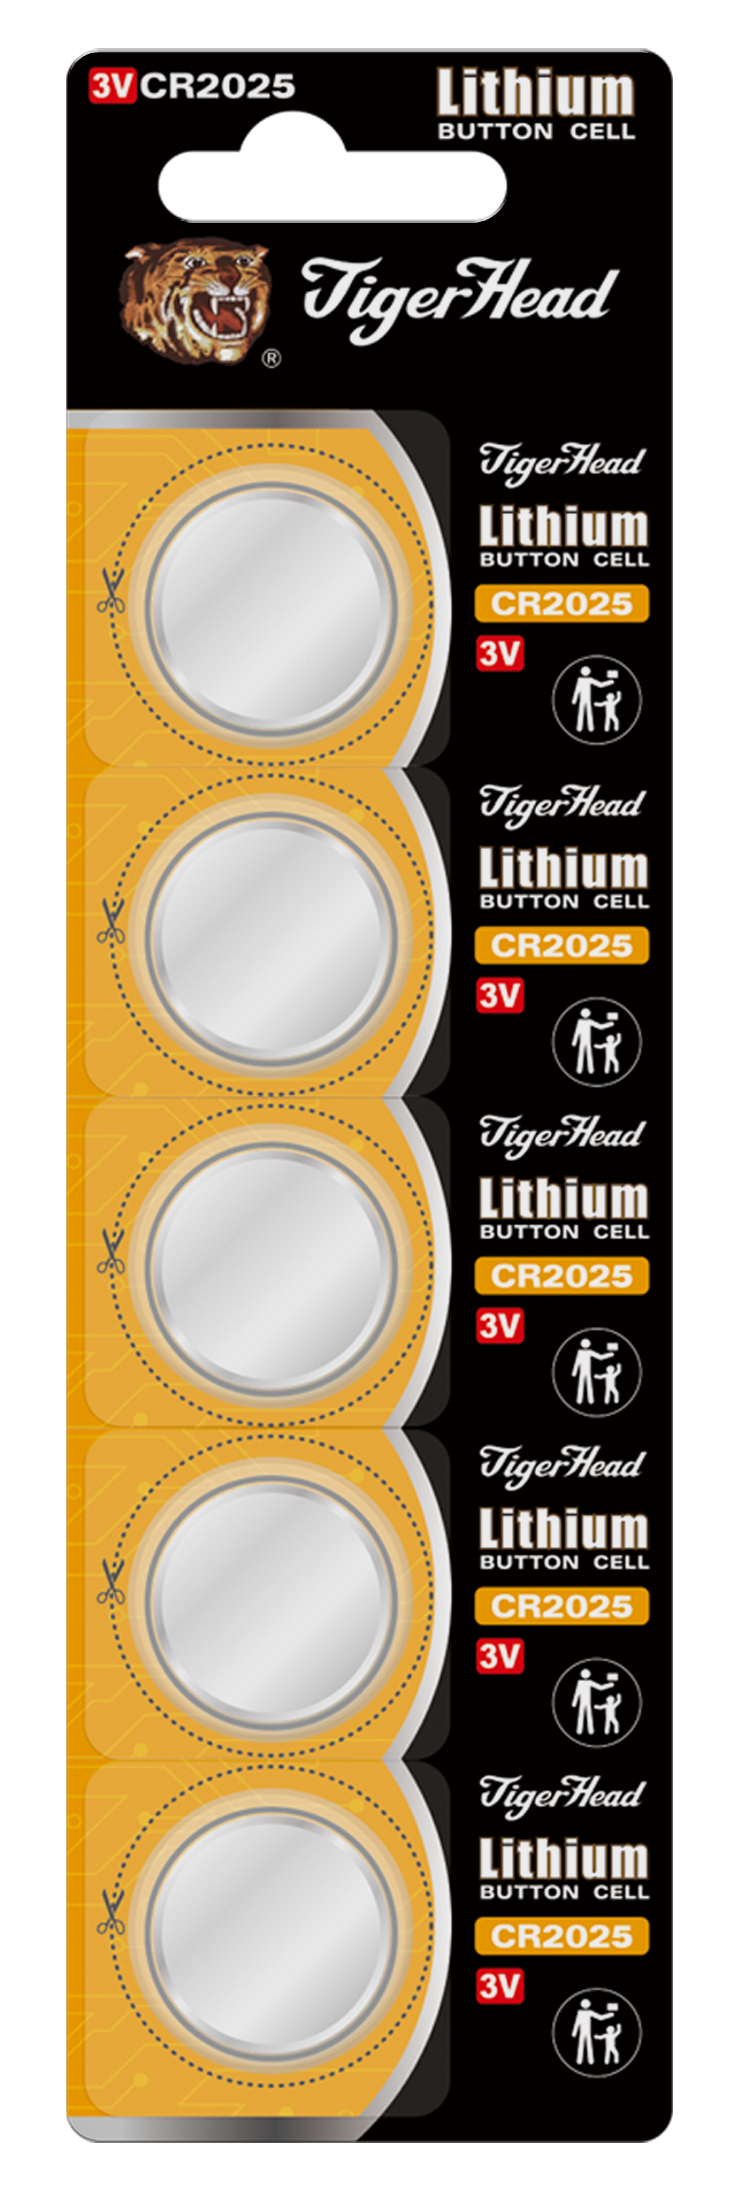 Tiger Head CR2016 CR2025 CR2032 Lithium Button Cell Batteries 0% Mercury 3V battery manufacturer